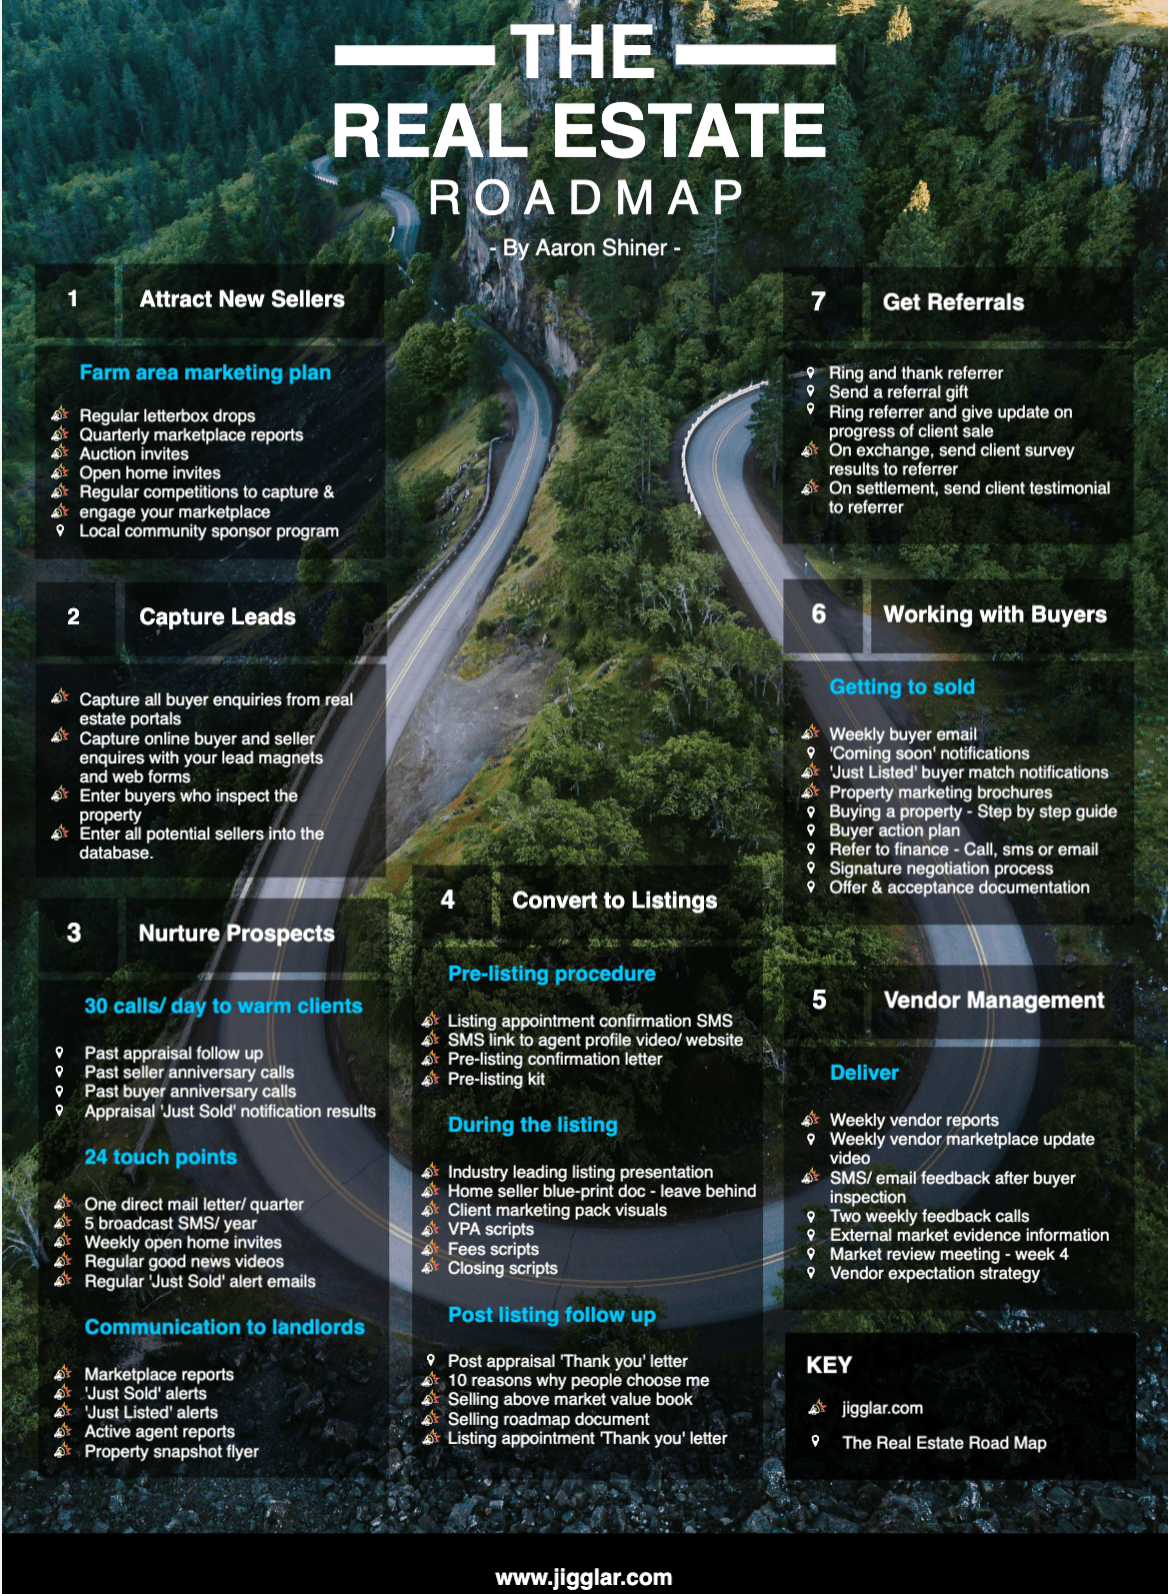 Real estate road map with a highway background image. 